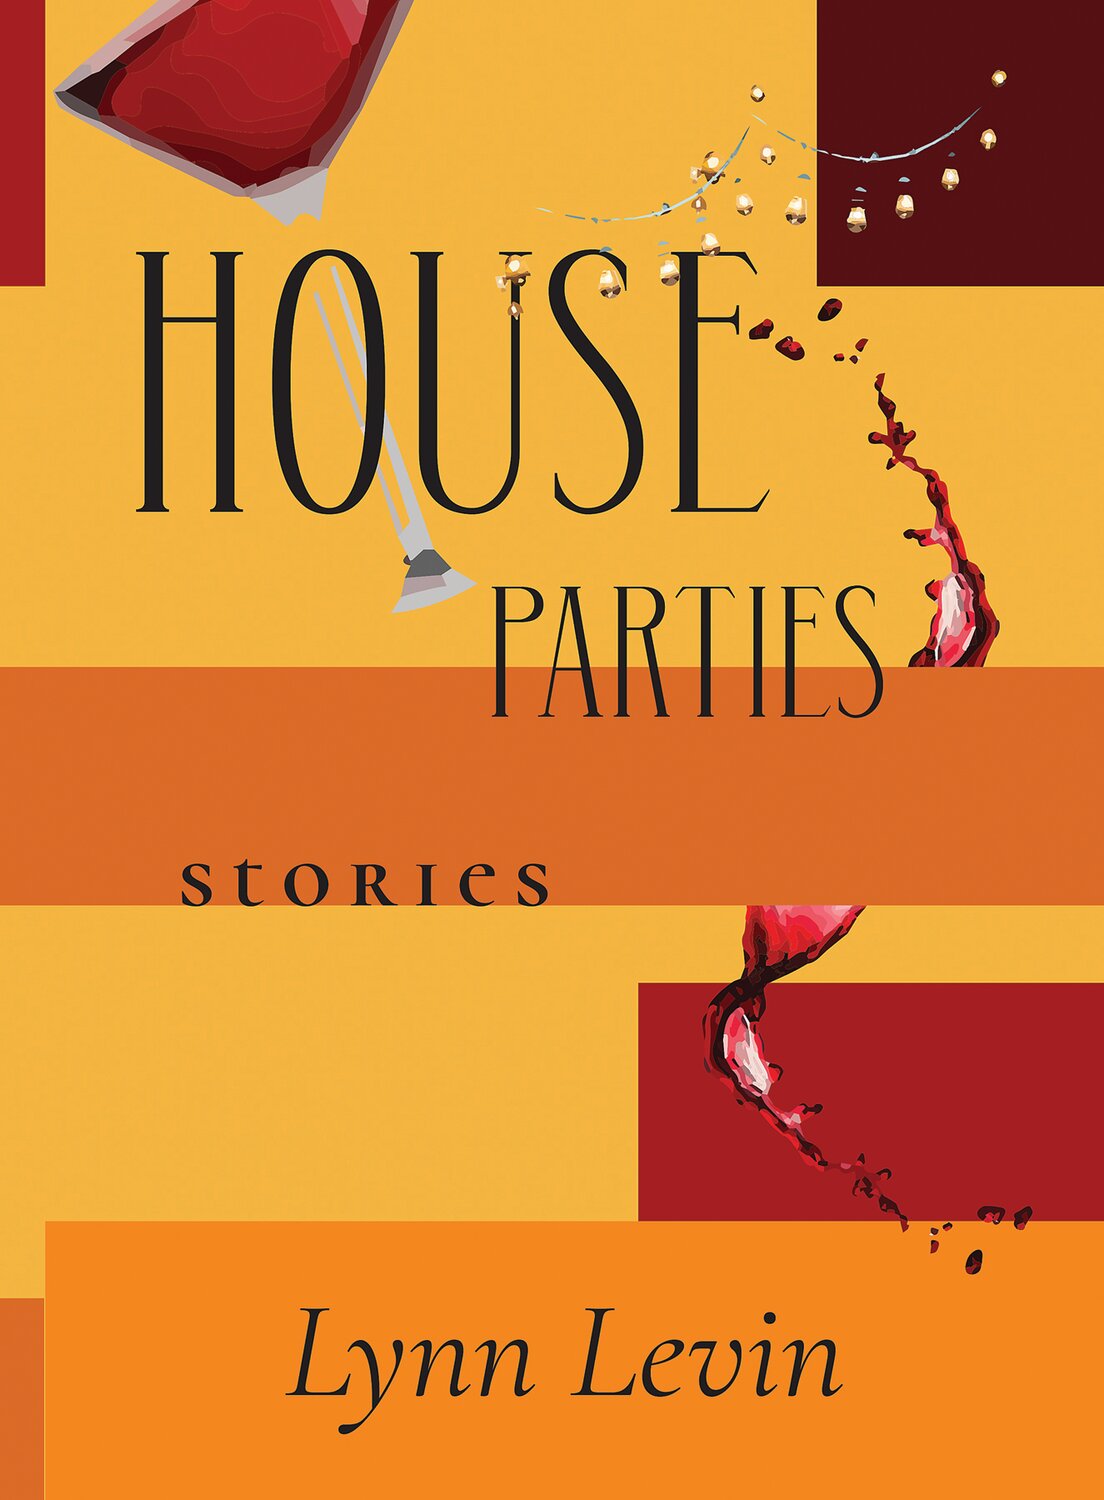 Lynn Levin’s newest book, “House Parties,” is her first collection of short stories. It’s a rich assortment of imaginative characters jousting at, dancing along with, and sometimes maybe shaking their heads bemusedly at modern life.